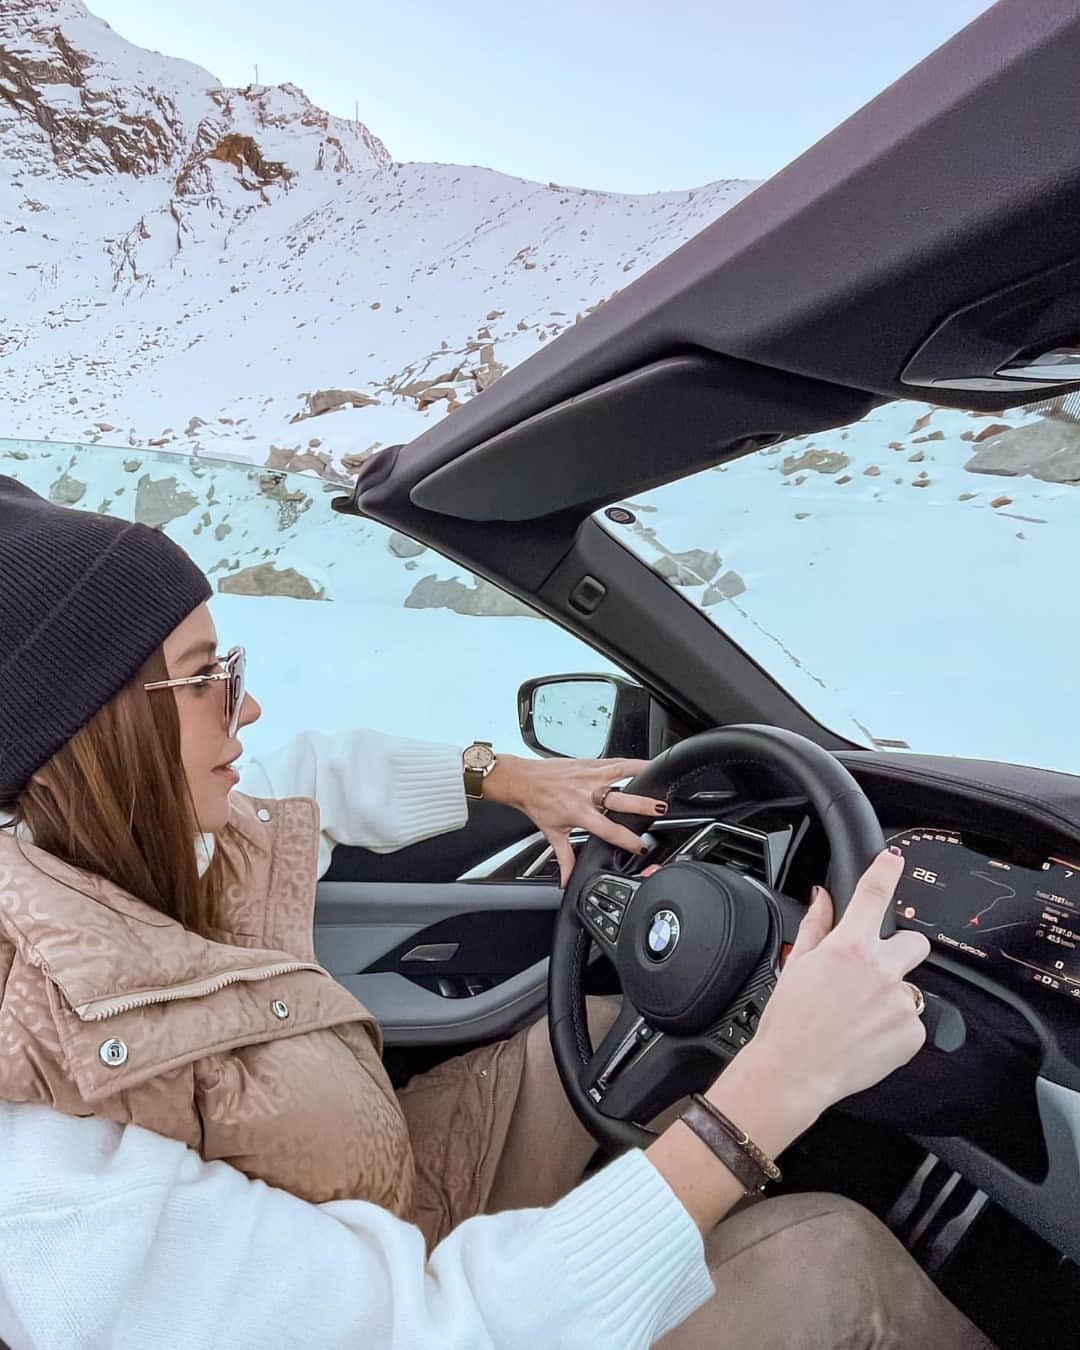 BMWのインスタグラム：「Dreaming of ski szn? ❄️✌️ 📸: @jolie_janine @lucbook #BMWRepost   The BMW M4 Competition Coupé & the BMW M4 Competition Convertible.  #THEM4 #BMW #M4 #BMWM #MPower   BMW M4 Competition M xDrive Coupé: Combined fuel consumption: 10.1–10.0 l/100 km. Combined CO2 emissions: 230–227 g/km.   BMW M4 Competition M xDrive Convertible: Combined fuel consumption: 10.2 l/100 km. Combined CO2 emissions: 233–231 g/km. All data according to WLTP. Further info: www.bmw.com/disclaimer」